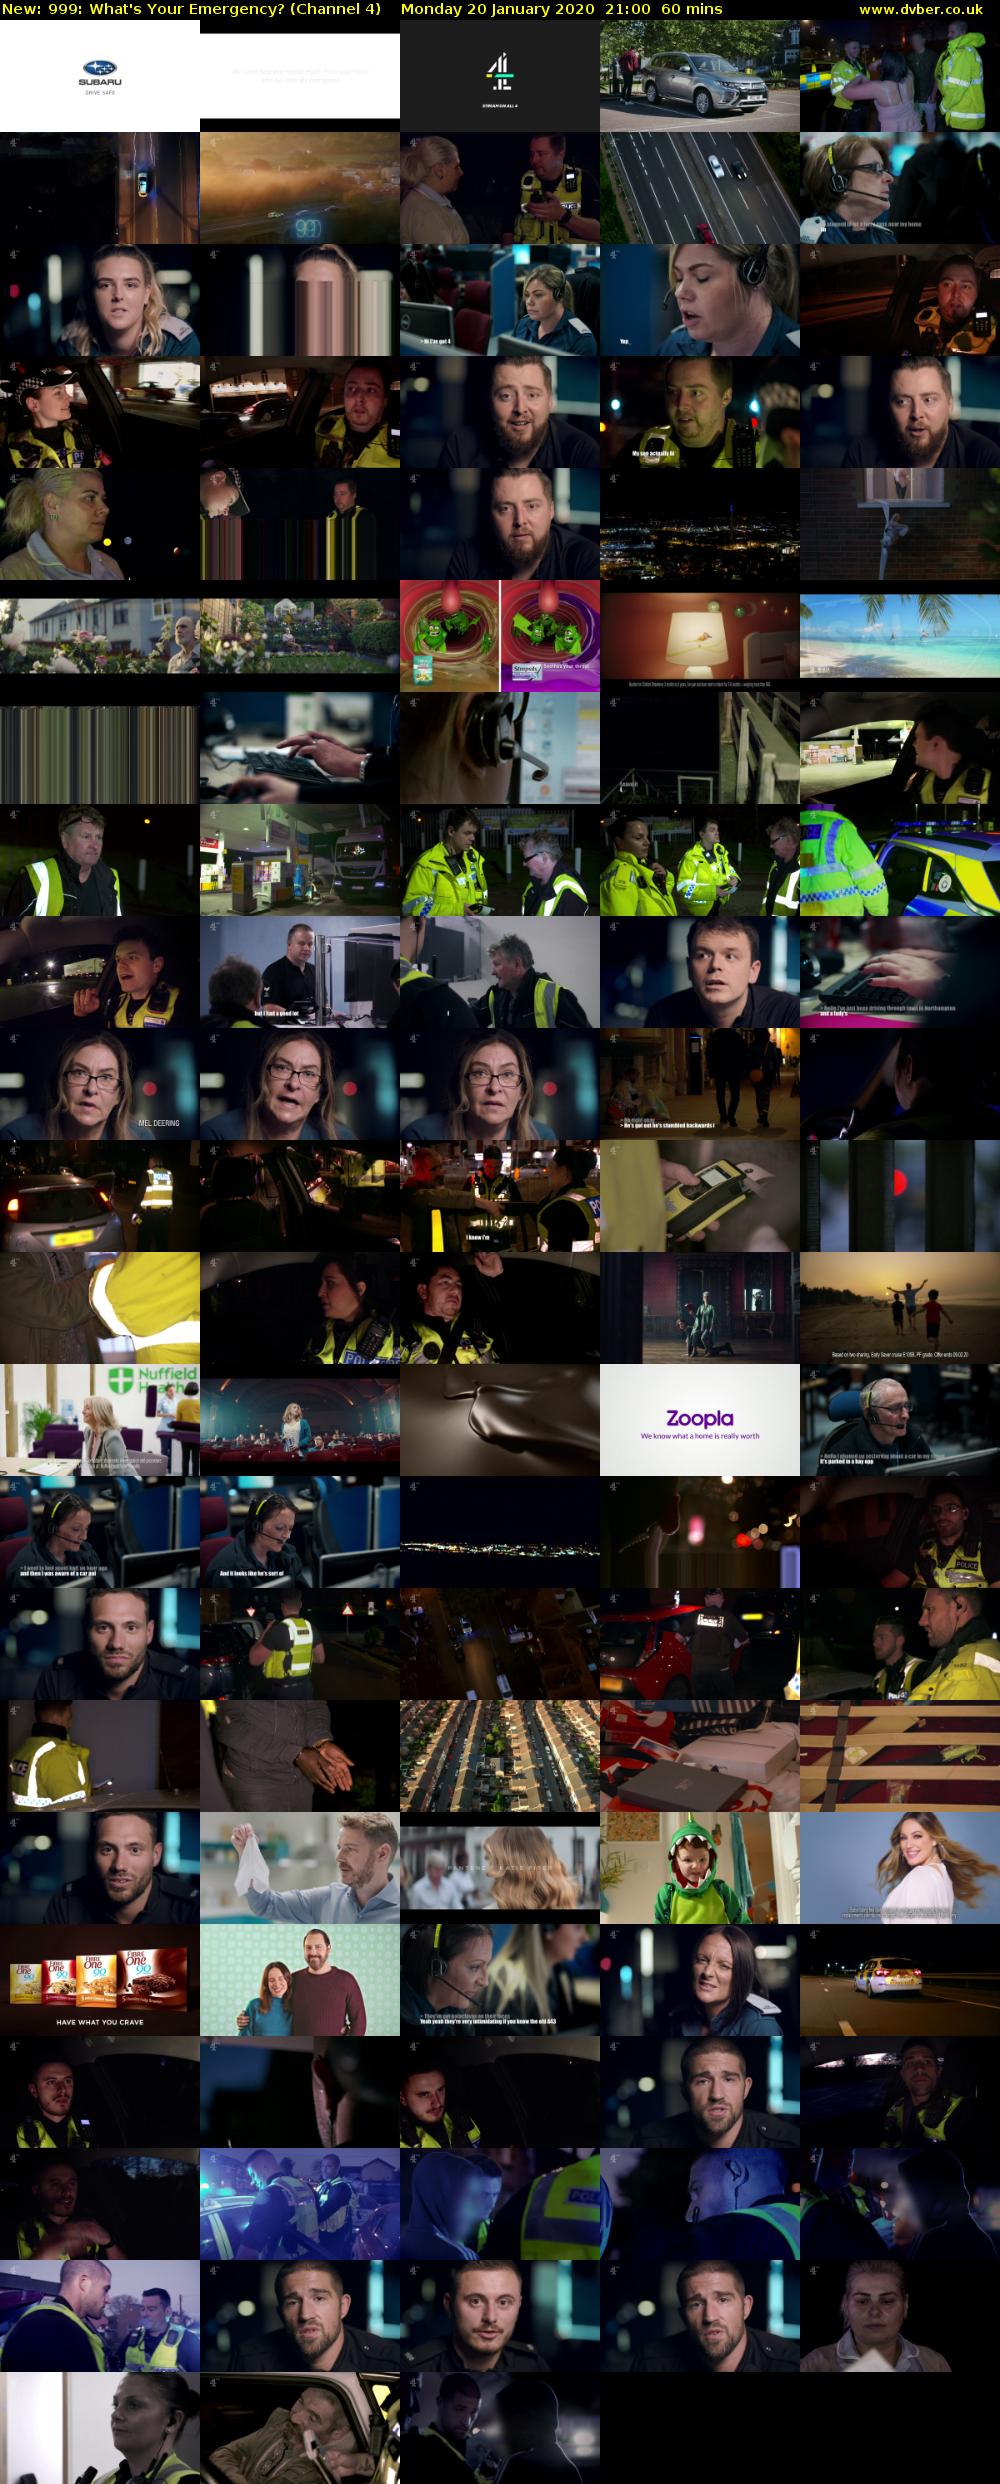 999: What's Your Emergency? (Channel 4) Monday 20 January 2020 21:00 - 22:00